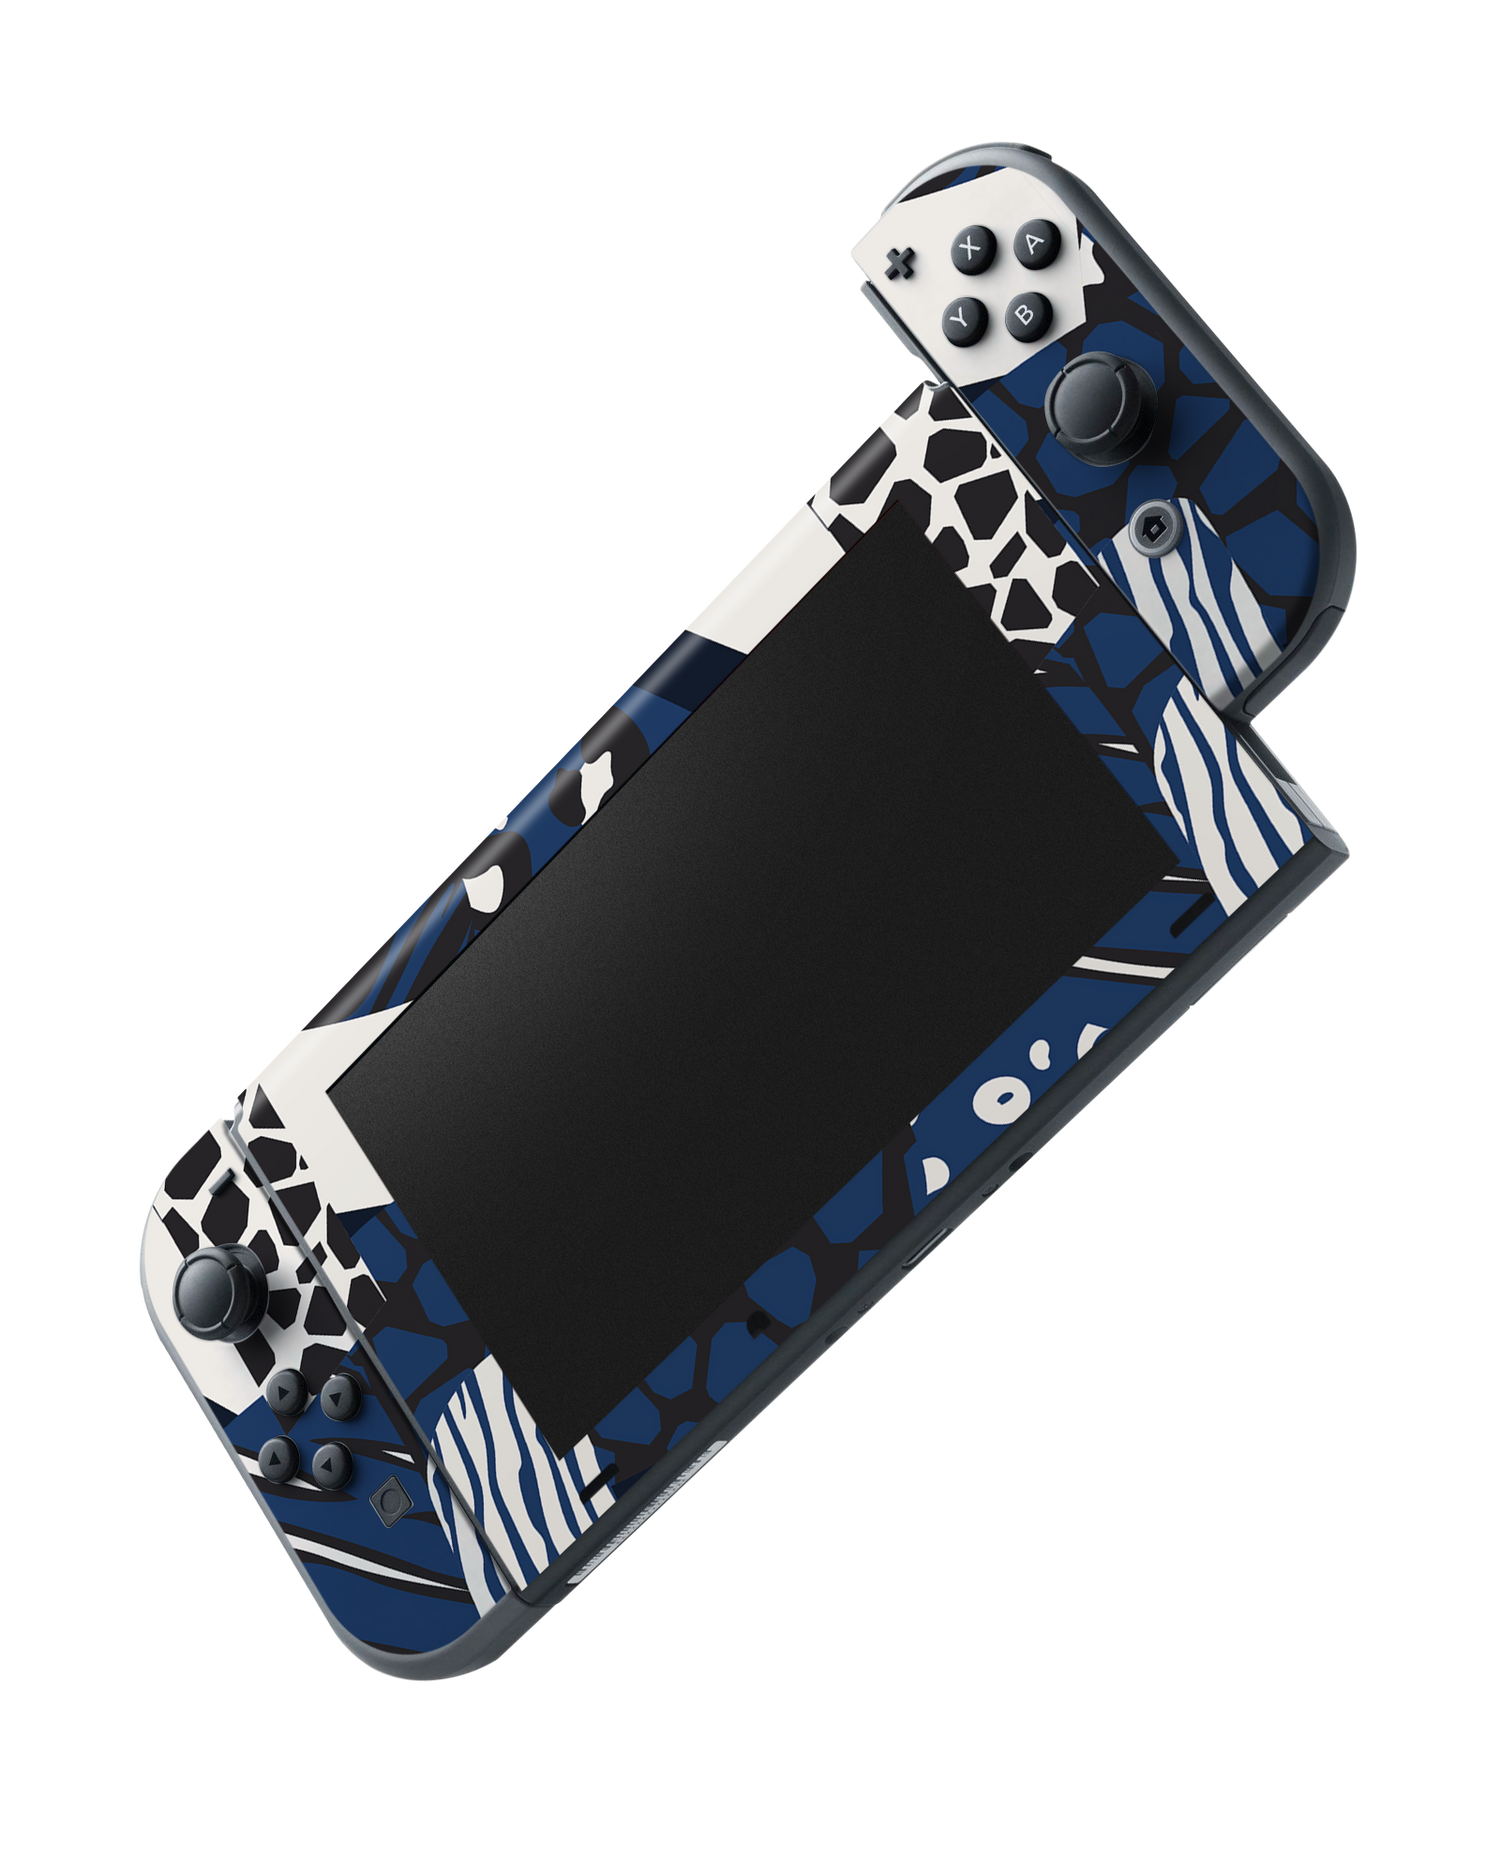 Animal Print Patchwork Console Skin for Nintendo Switch: Joy-Con removing 